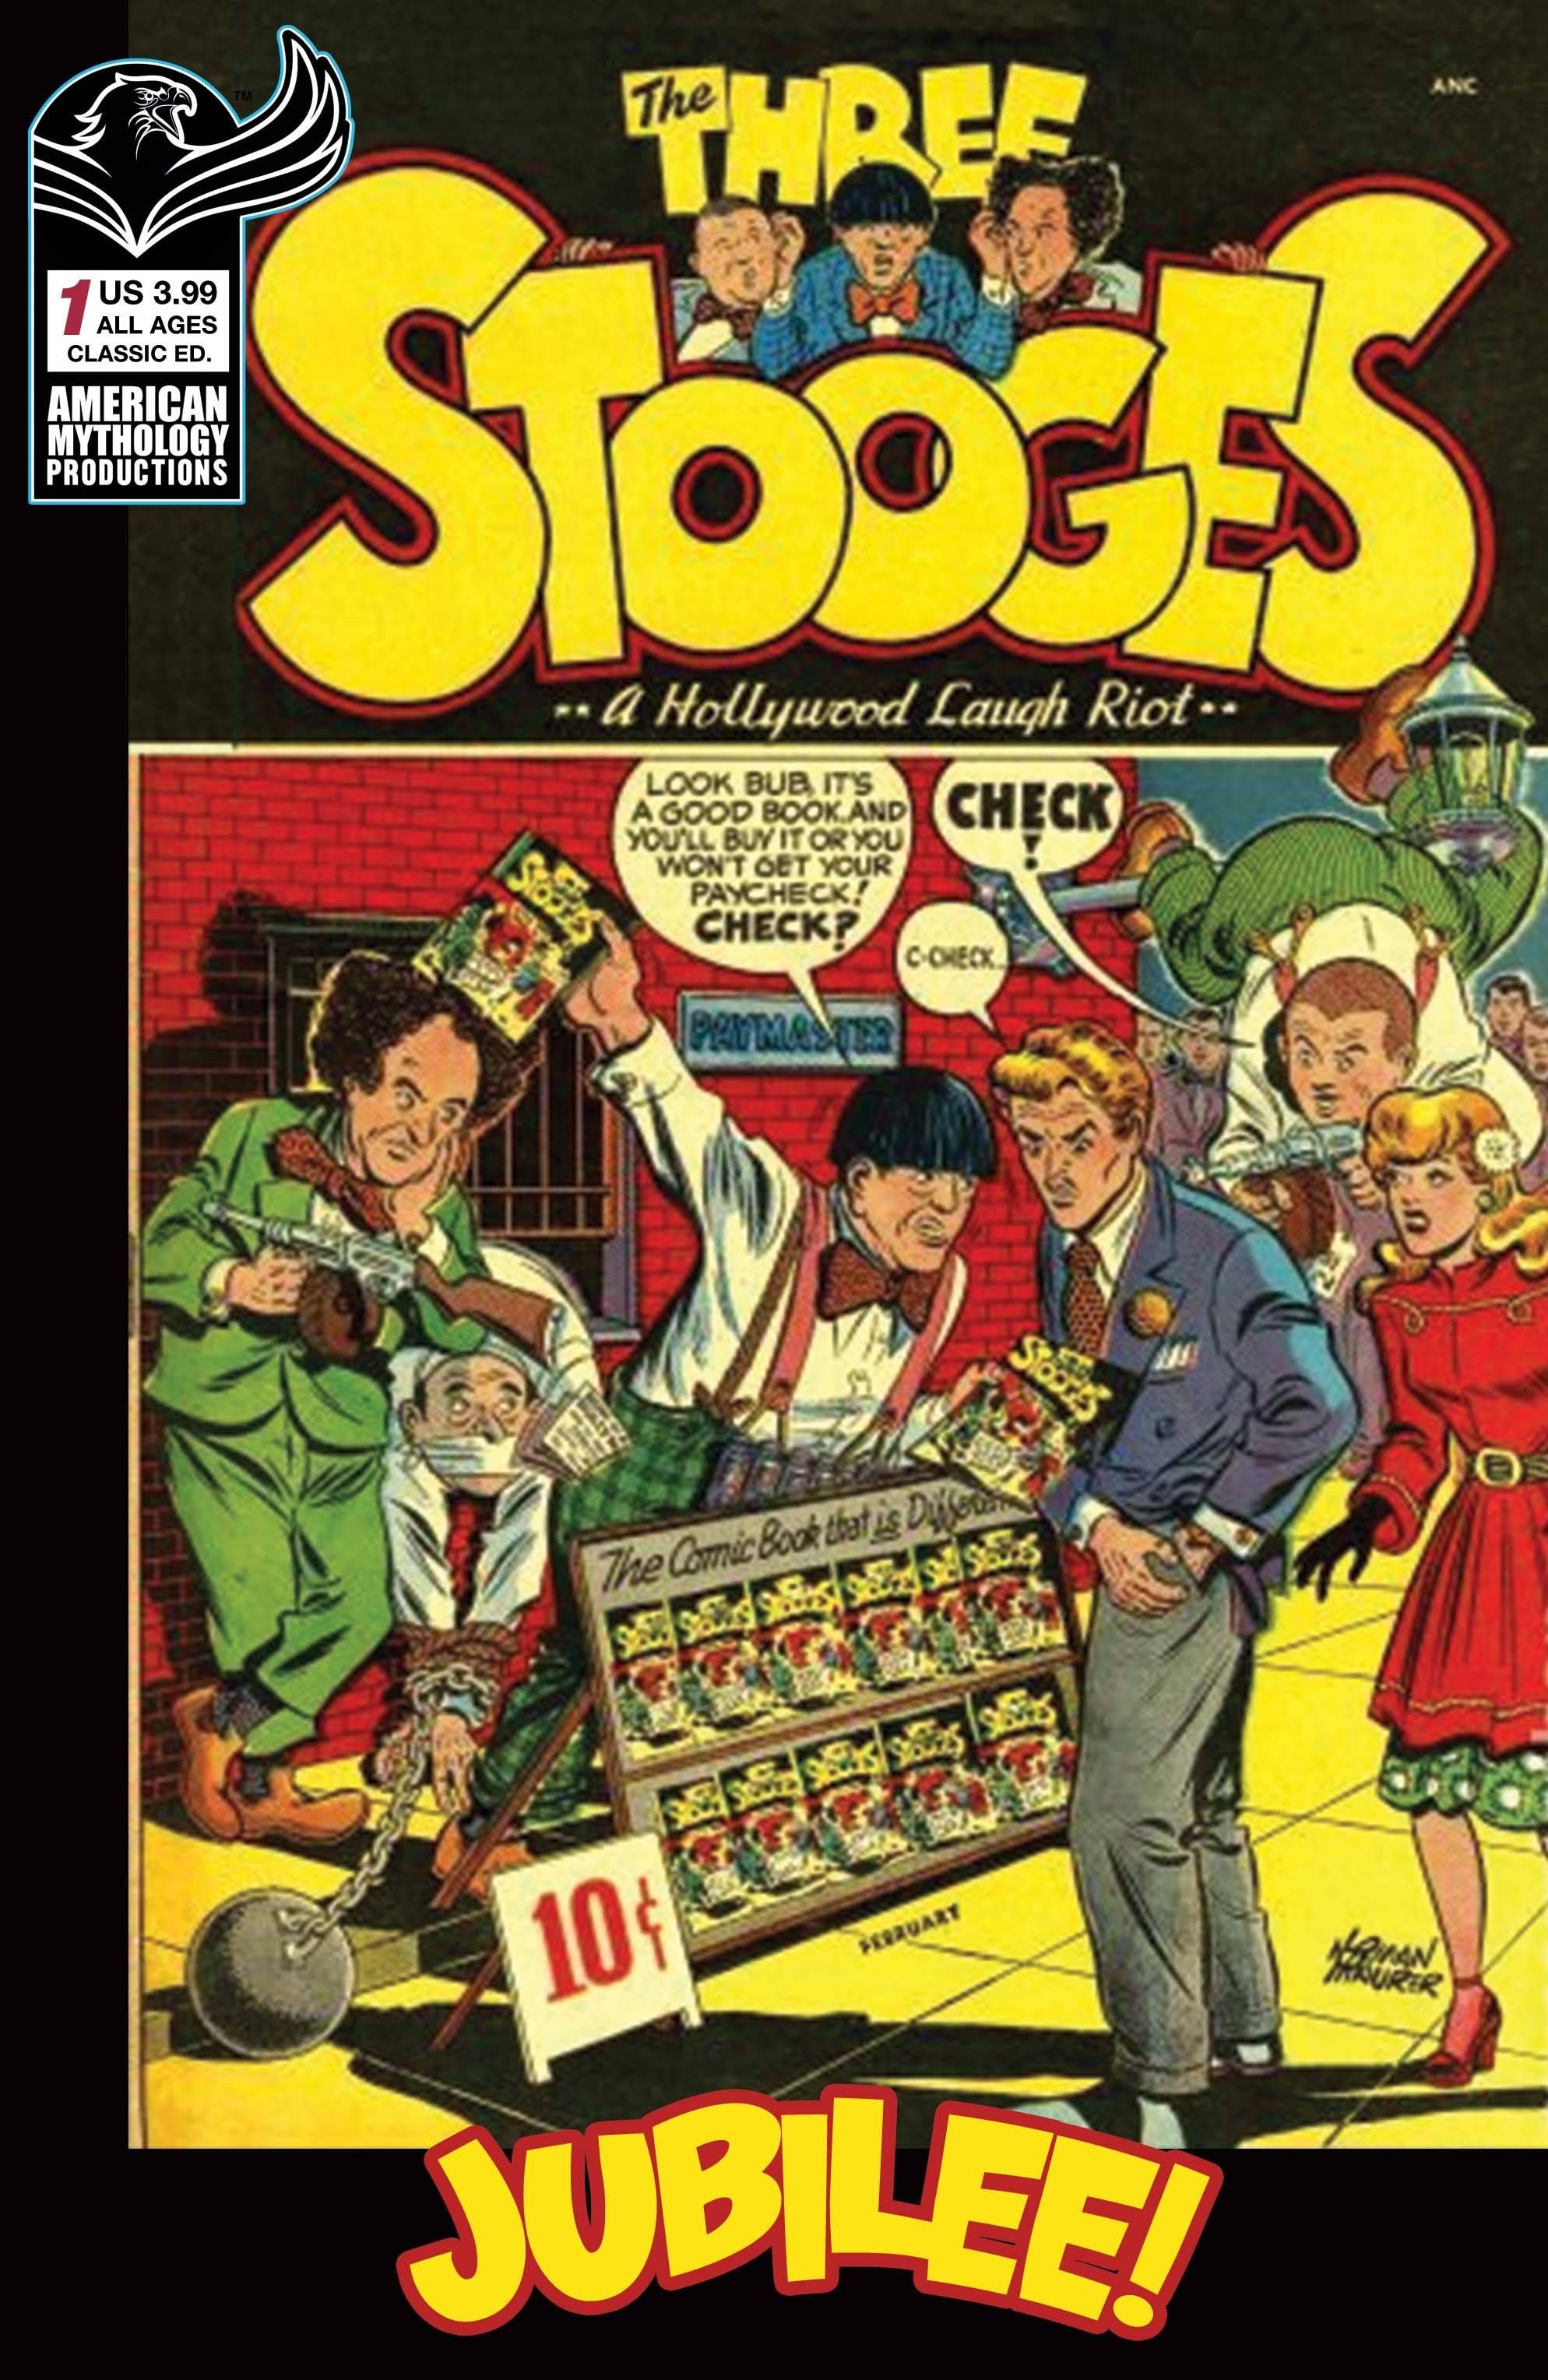 Am Archives: Three Stooges 1949 Jubilee Comic